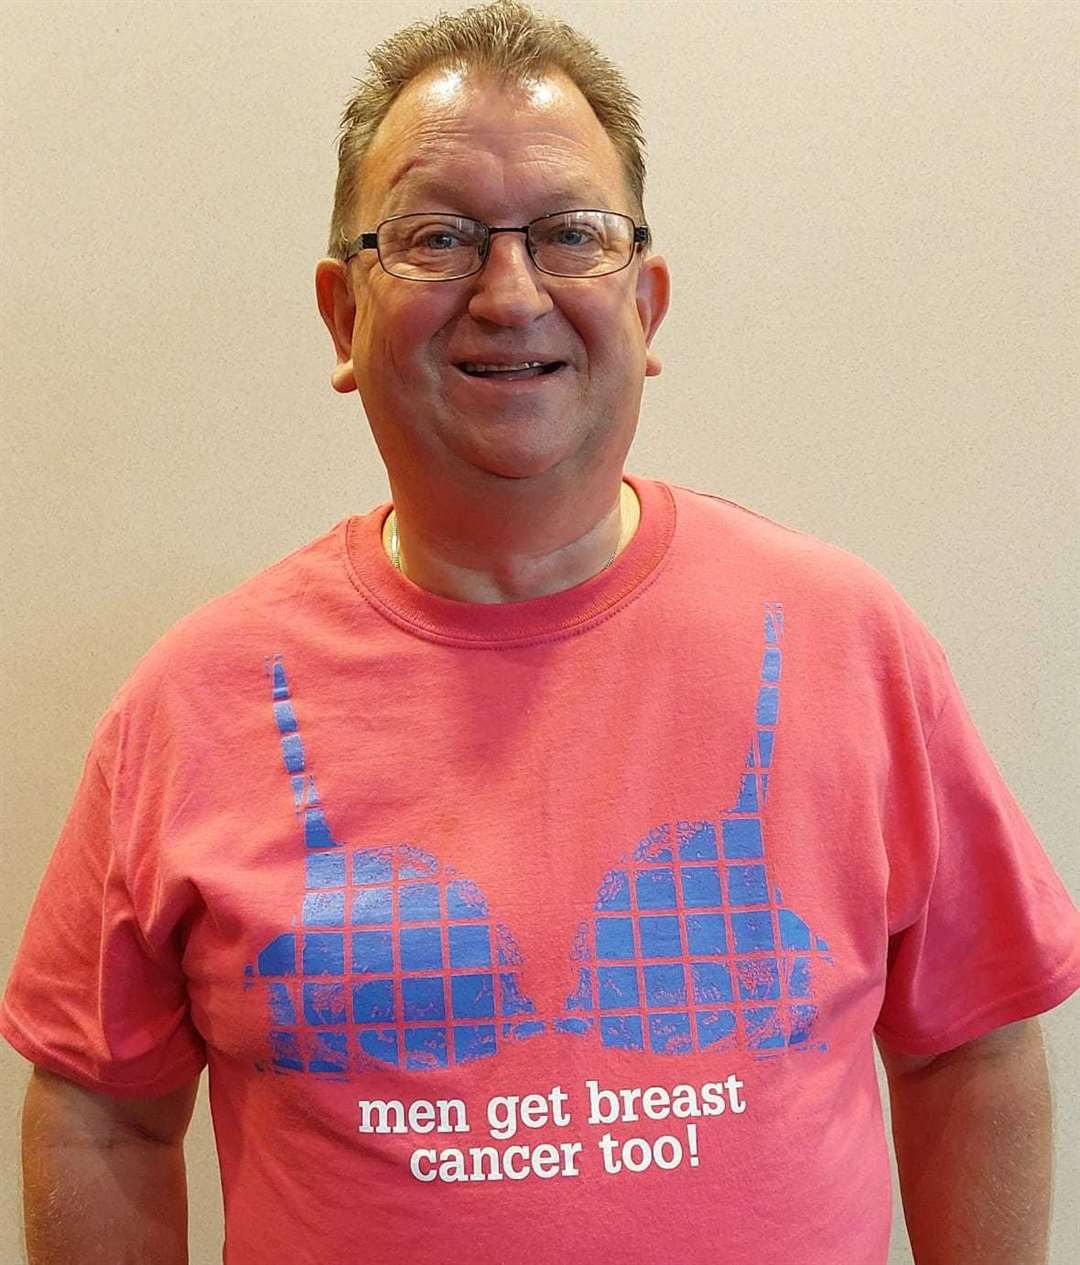 Mr Weaver, now 52, is battling cancer for a third time. Picture: Stuart Weaver